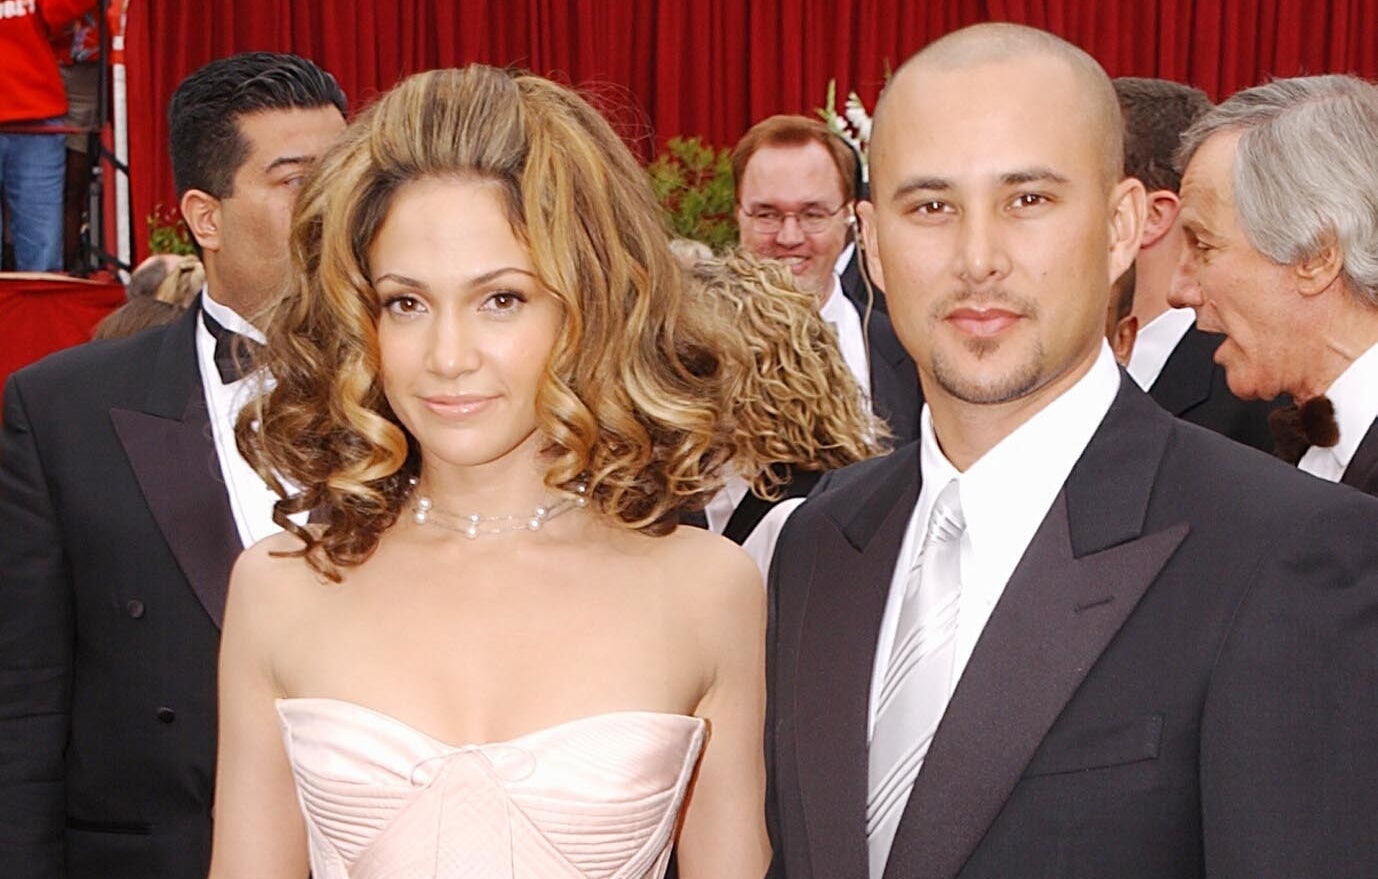 Jennifer Lopez in a strapless gown with Cris Judd in a suit on the red carpet